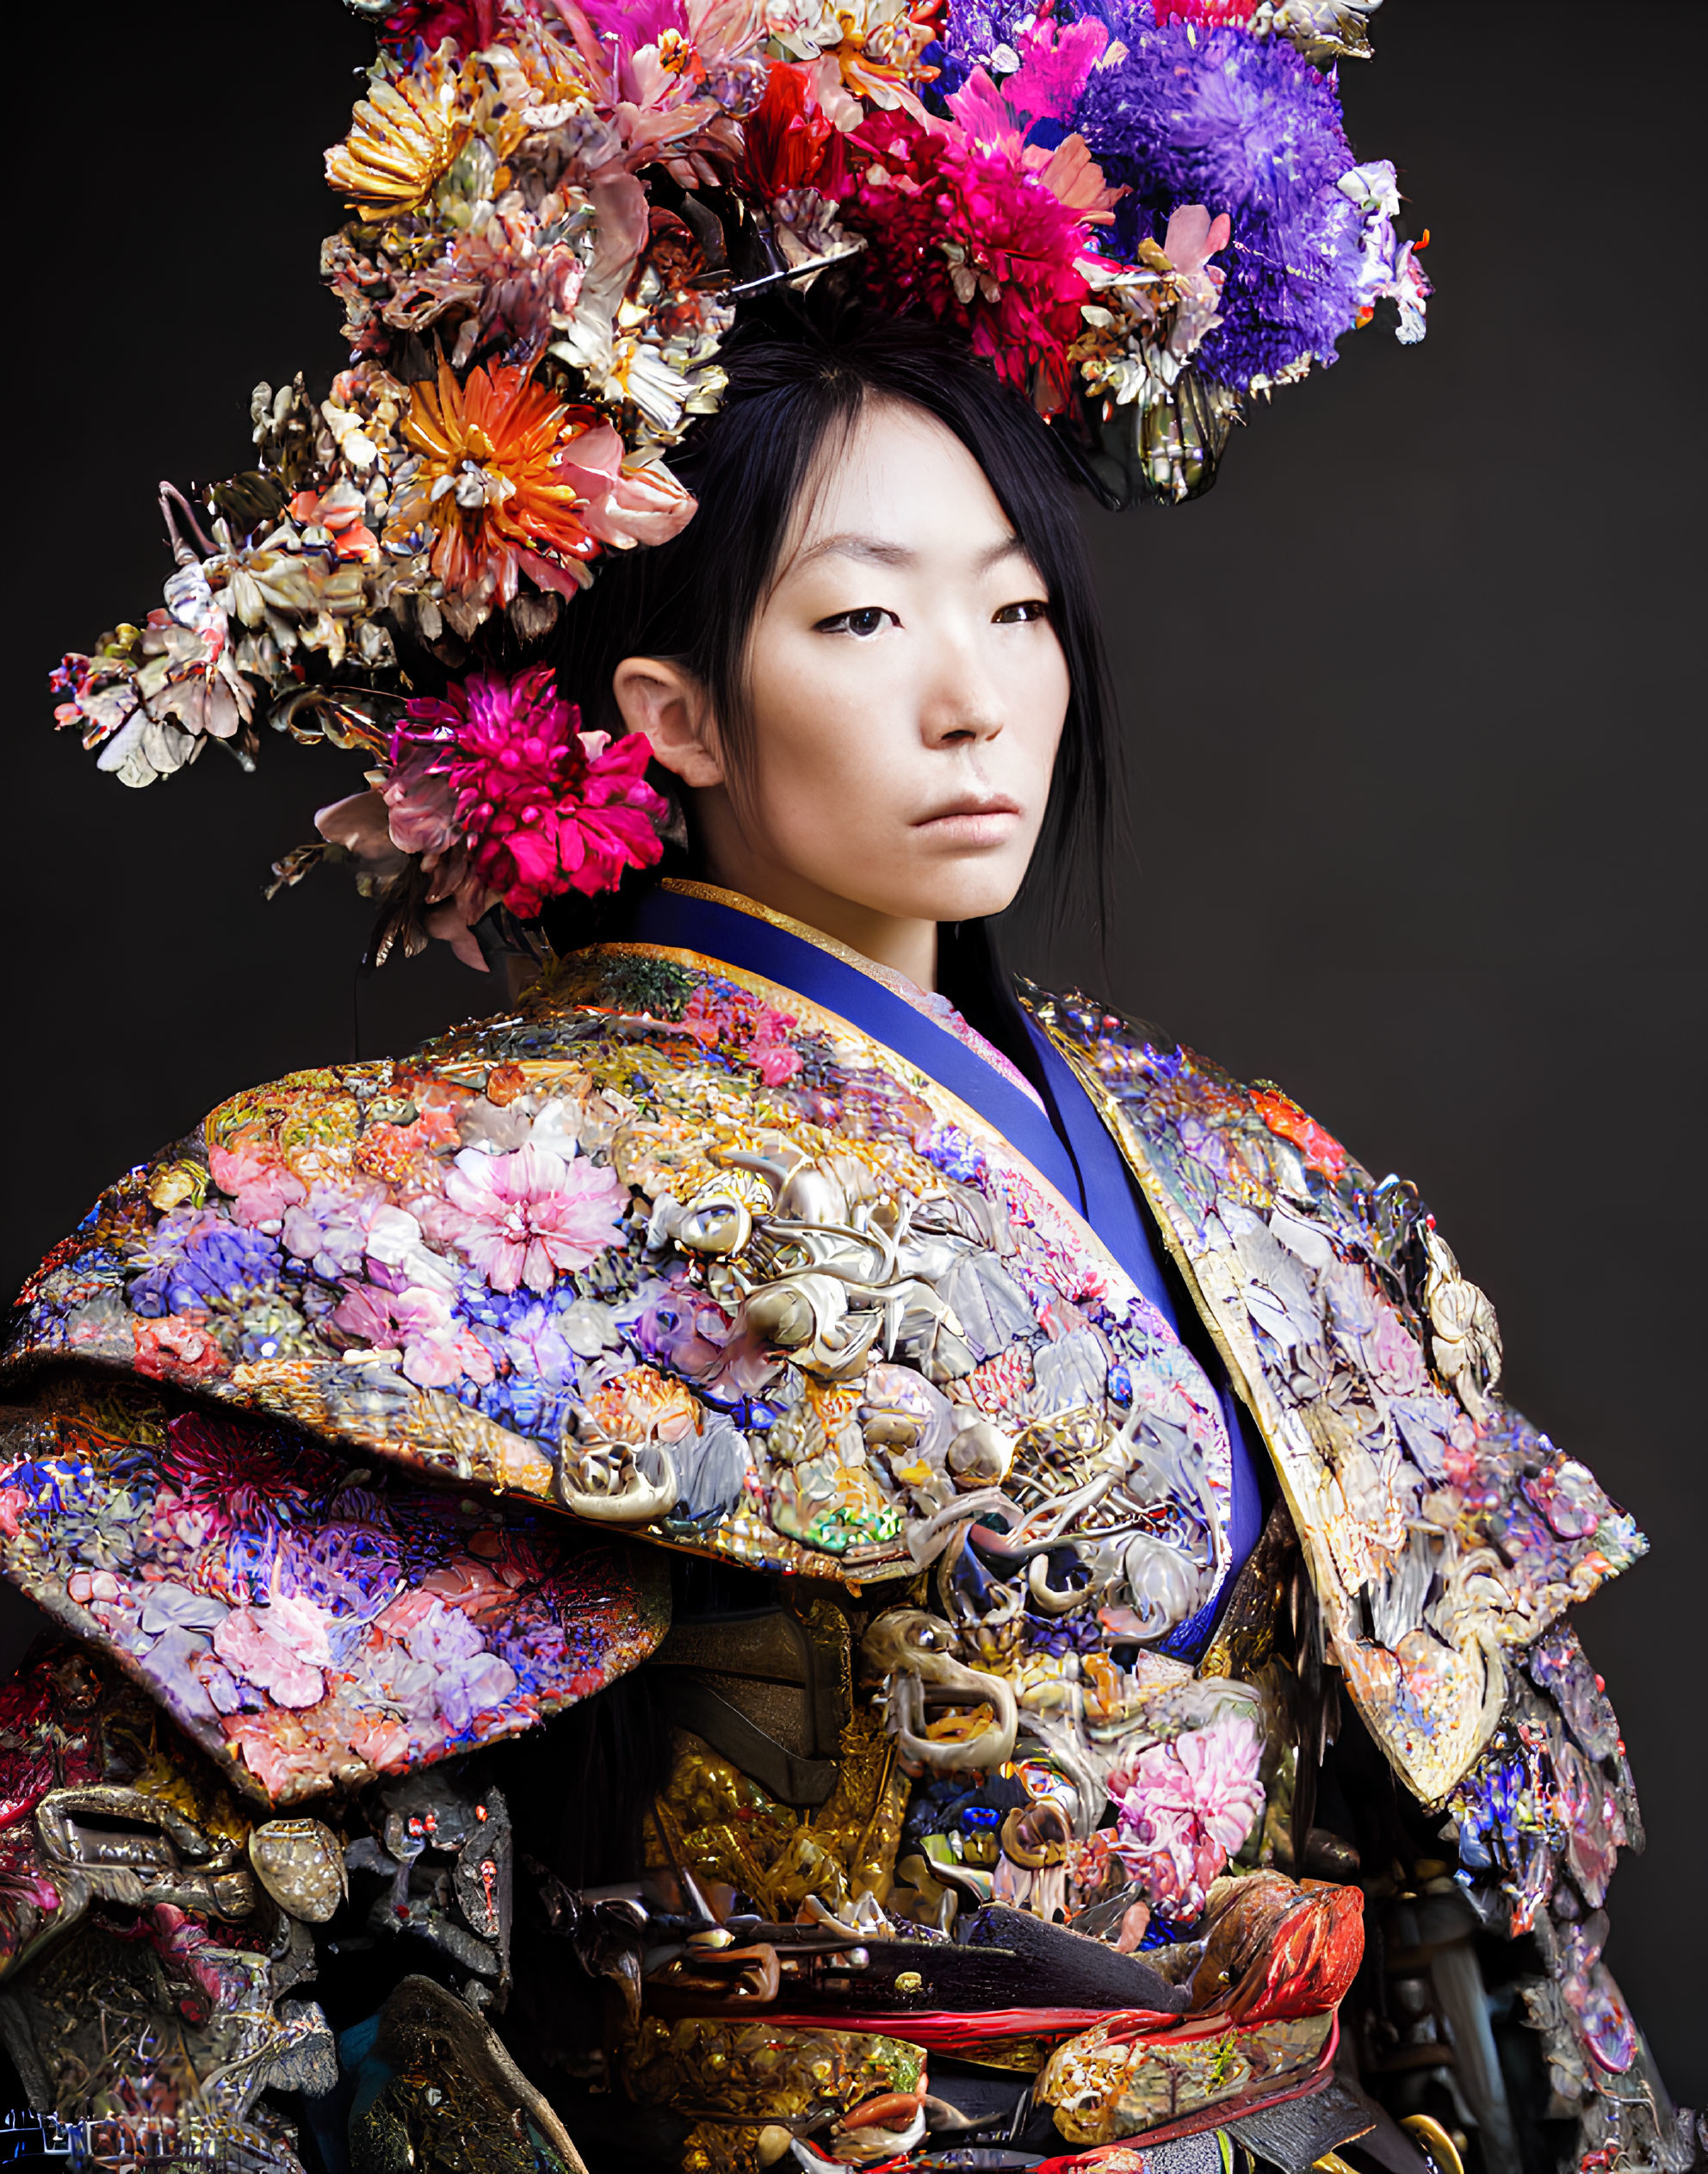 Traditional Japanese attire with ornate floral headdress and vibrant armor.